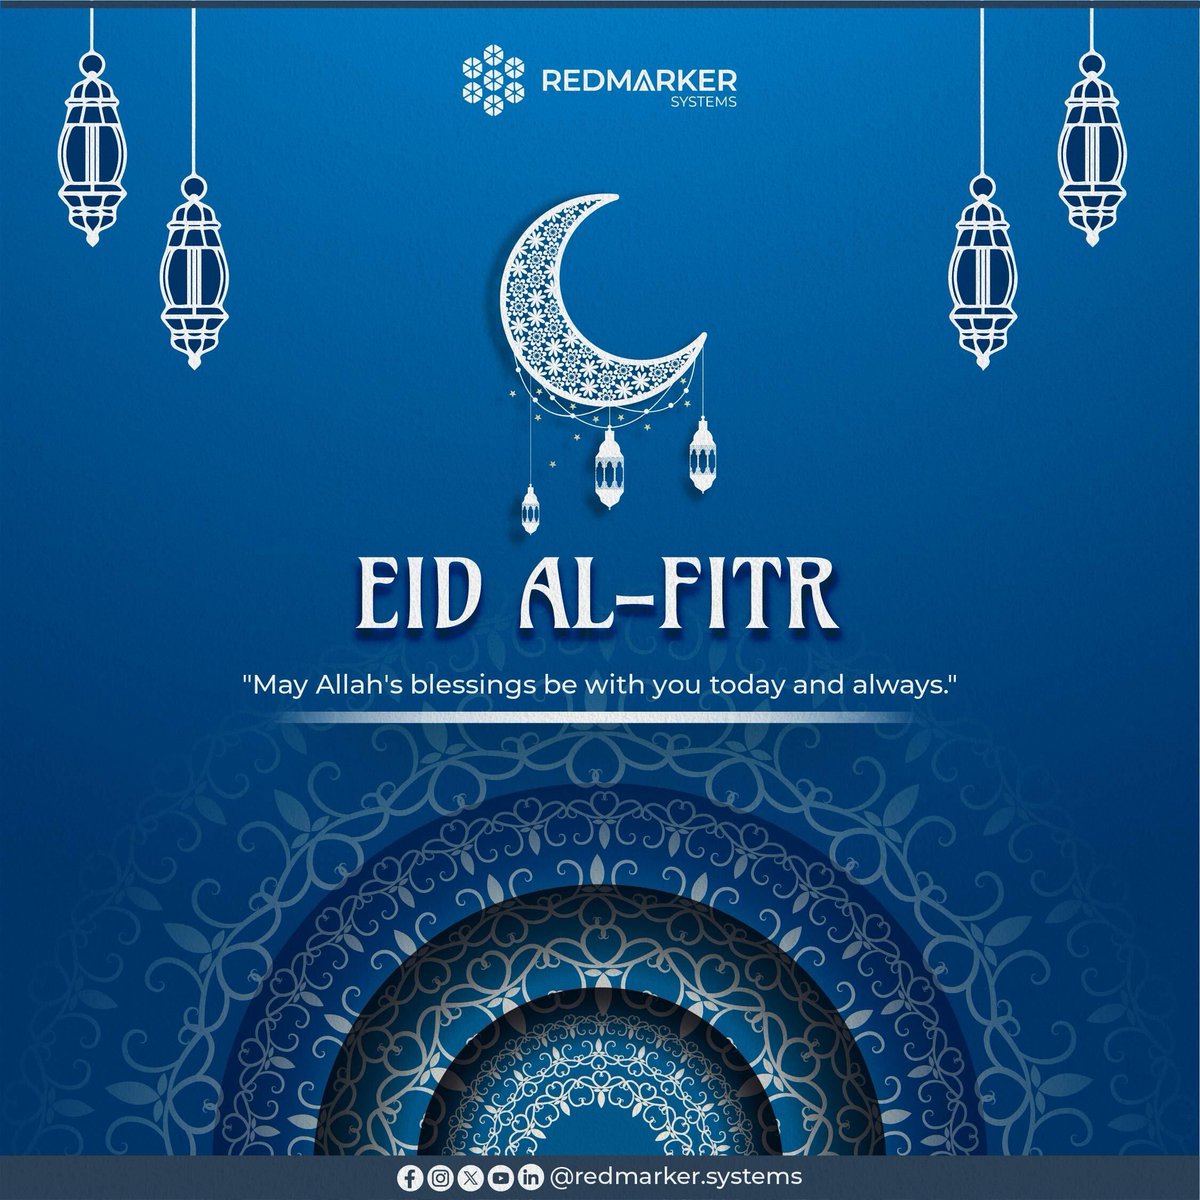 Wishing you and your loved ones a joyous Eid filled with blessings, laughter, and cherished moments!

Eid Mubarak from all of us at RedMarker Systems! 🌙✨

#EidMubarak #Eid2024 #عيد_الفطر #RedMarkerSystems